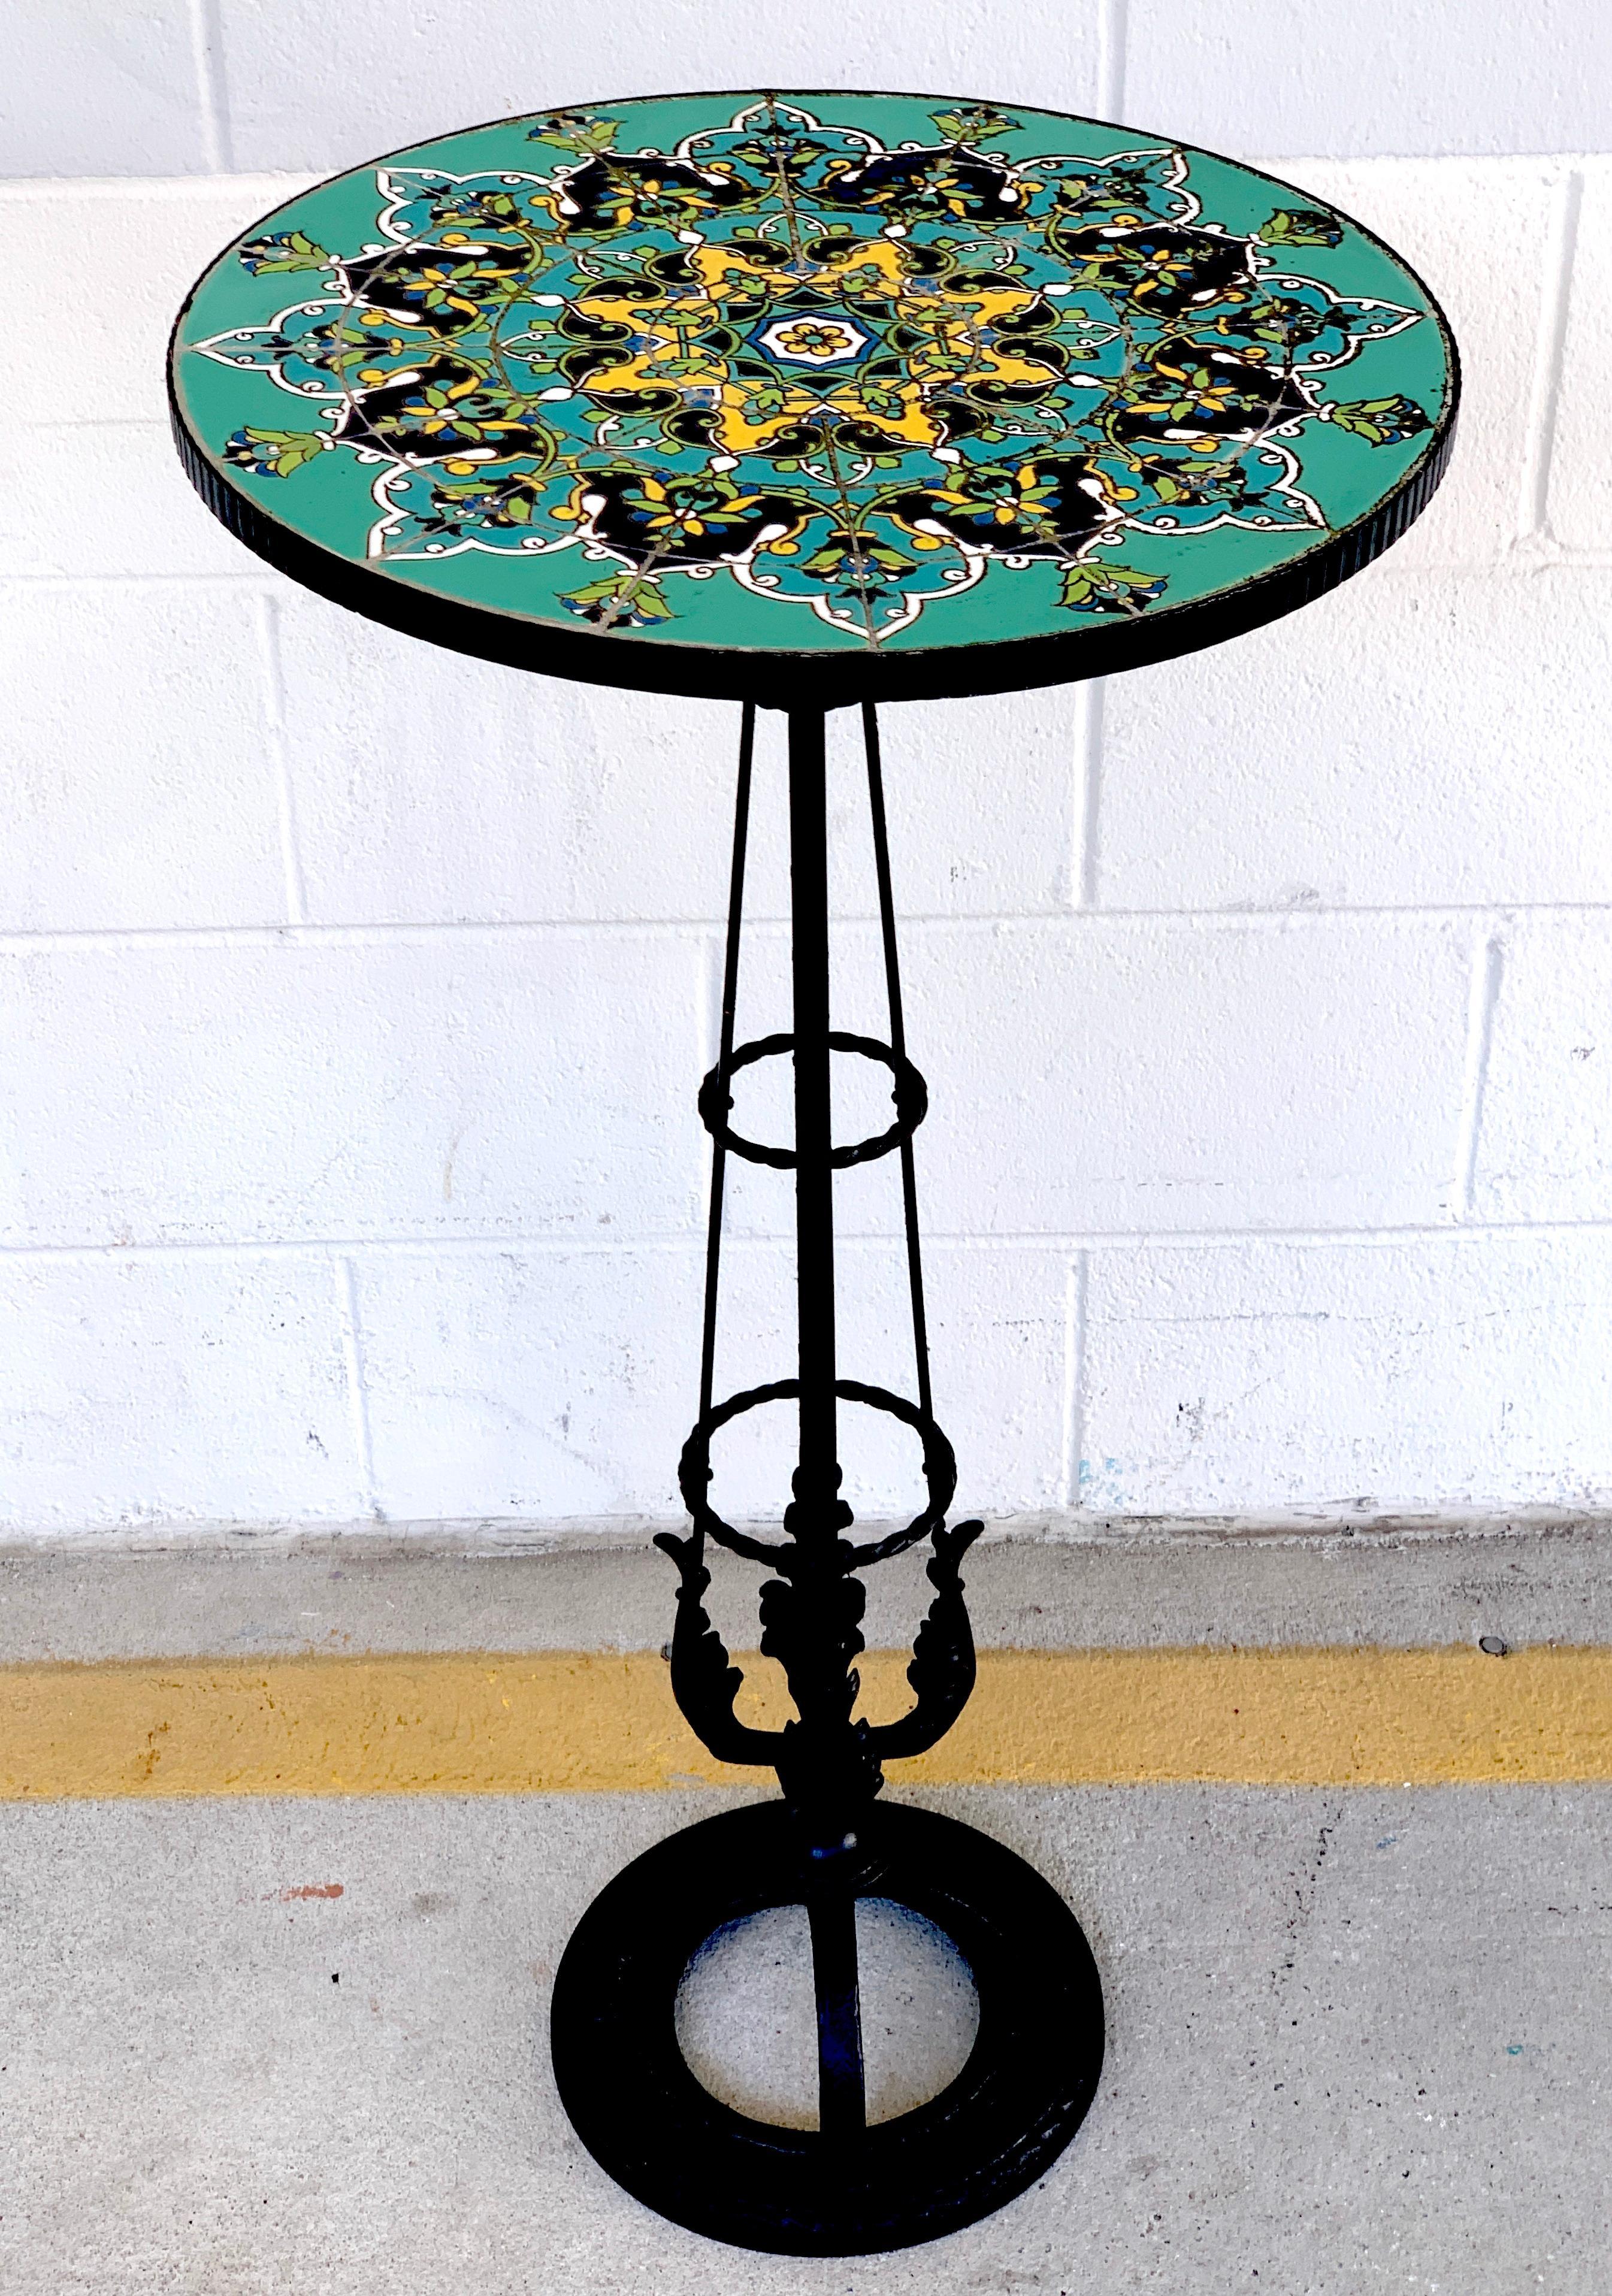 French Art Deco turquoise tile and wrought iron pedestal table, with exquisite enameled 18-inch circular top on a tapering wrought iron pedestal resting on a 11-inch diameter base.
 